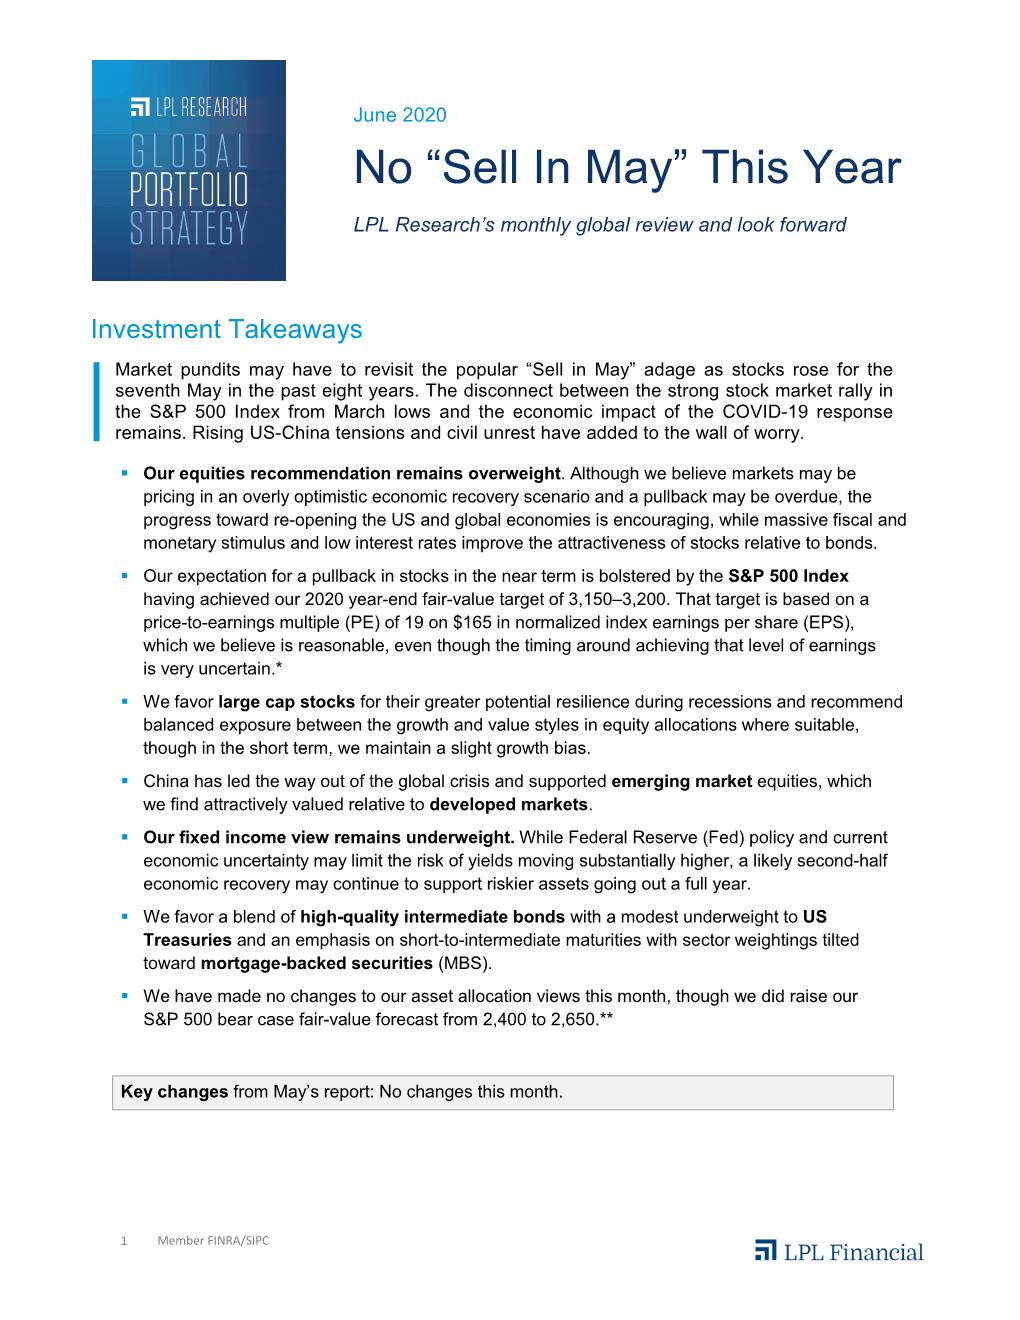 Sell in May” This Year LPL Research’S Monthly Global Review and Look Forward